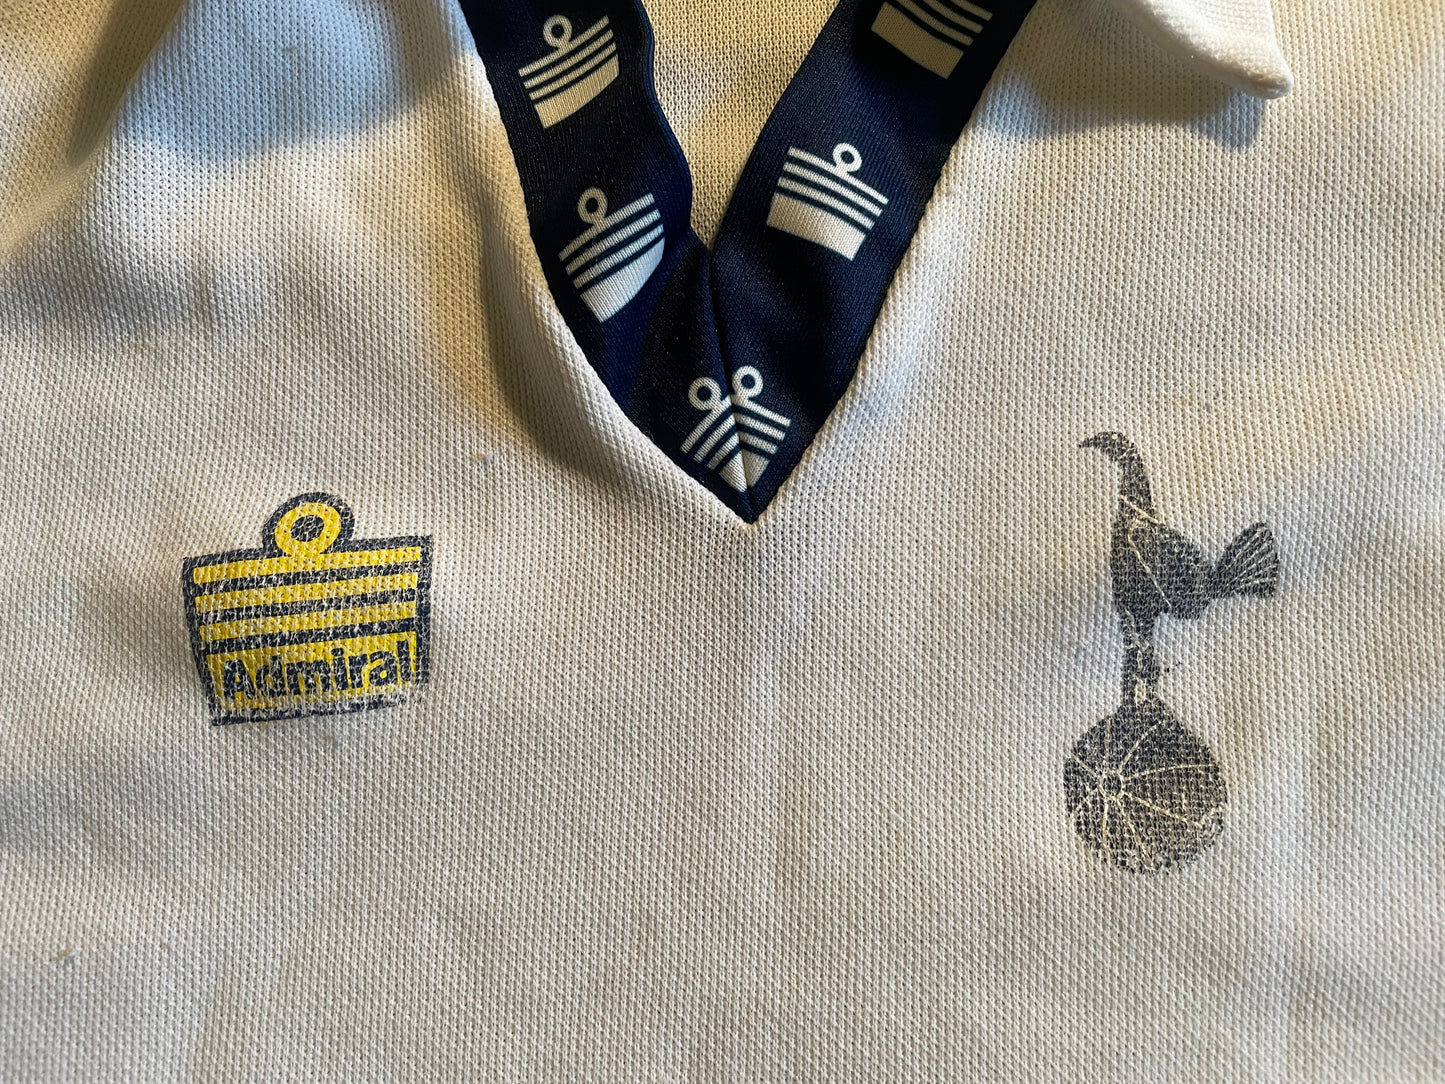 Tottenham 1977 Home Shirt (good) Childs. Size faded. 6 to 8 years? Height 15 inch